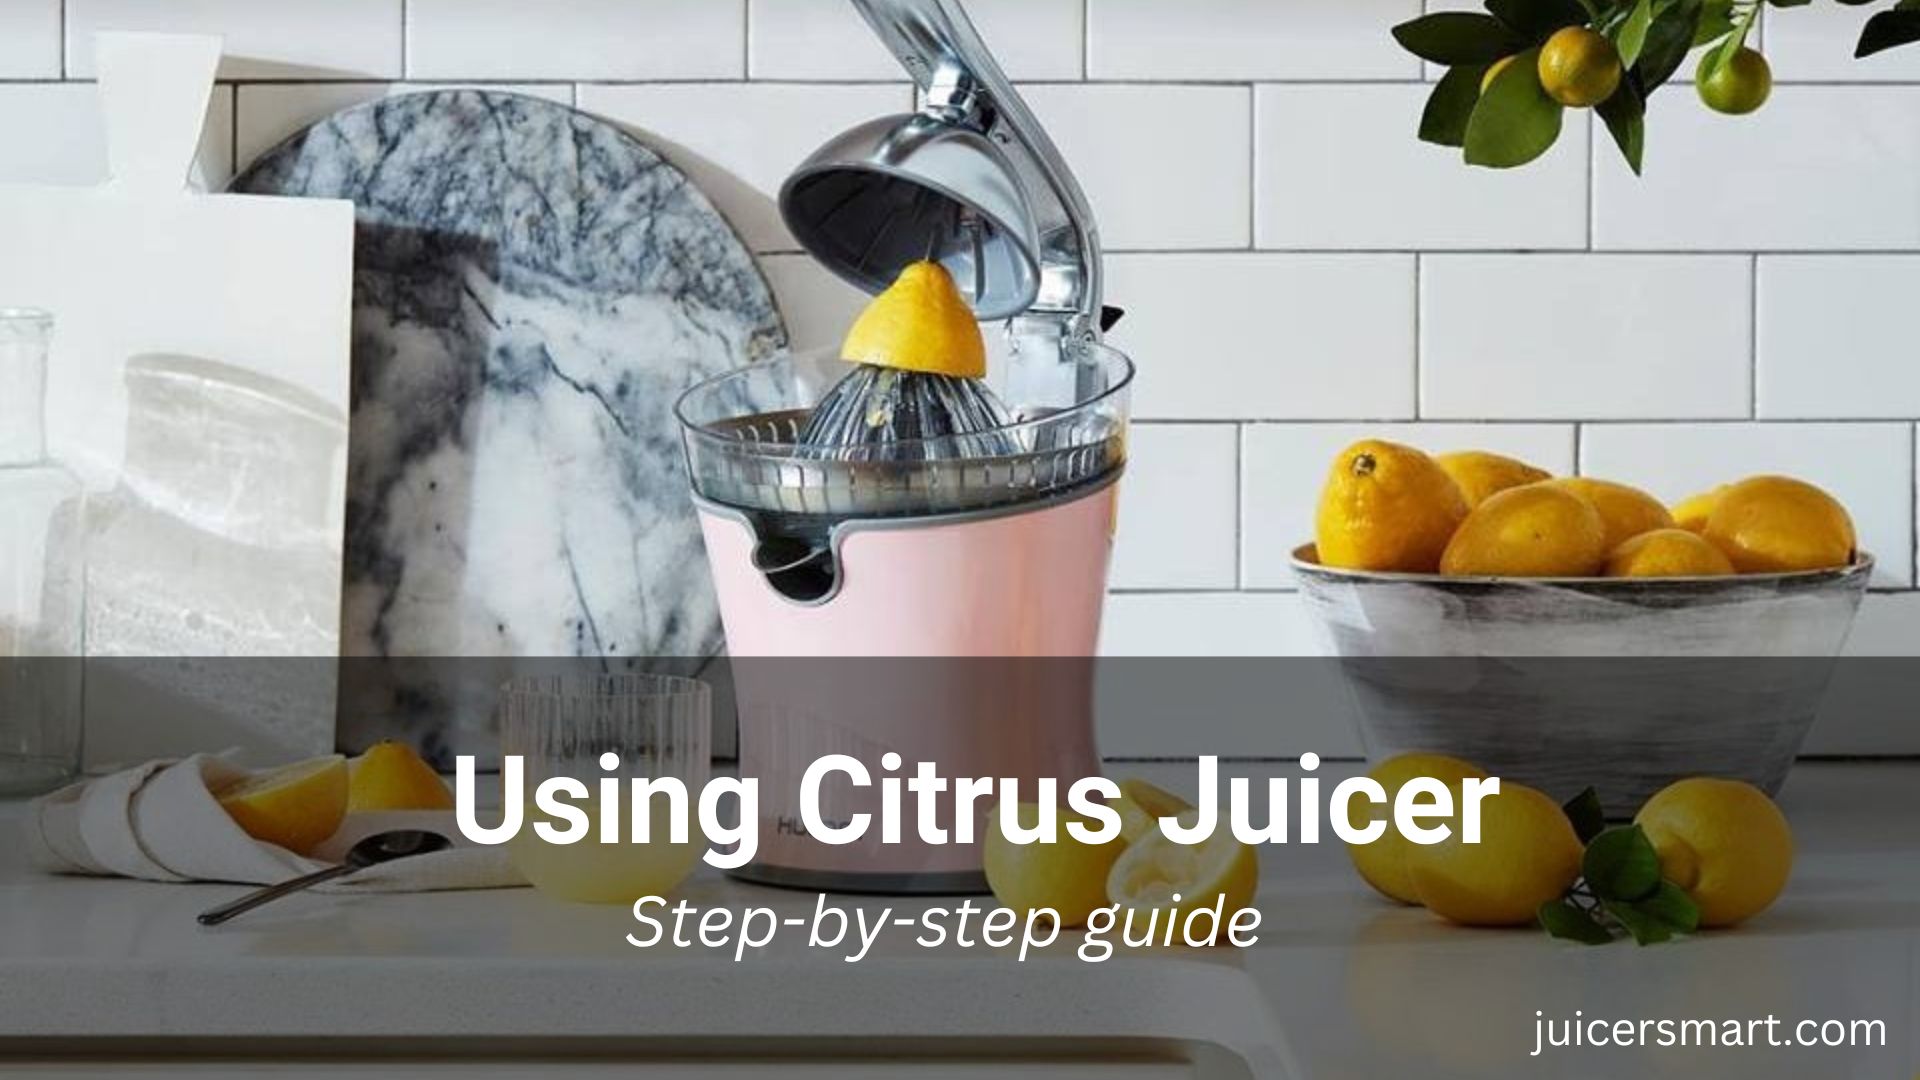 How to use Citrus Juicer